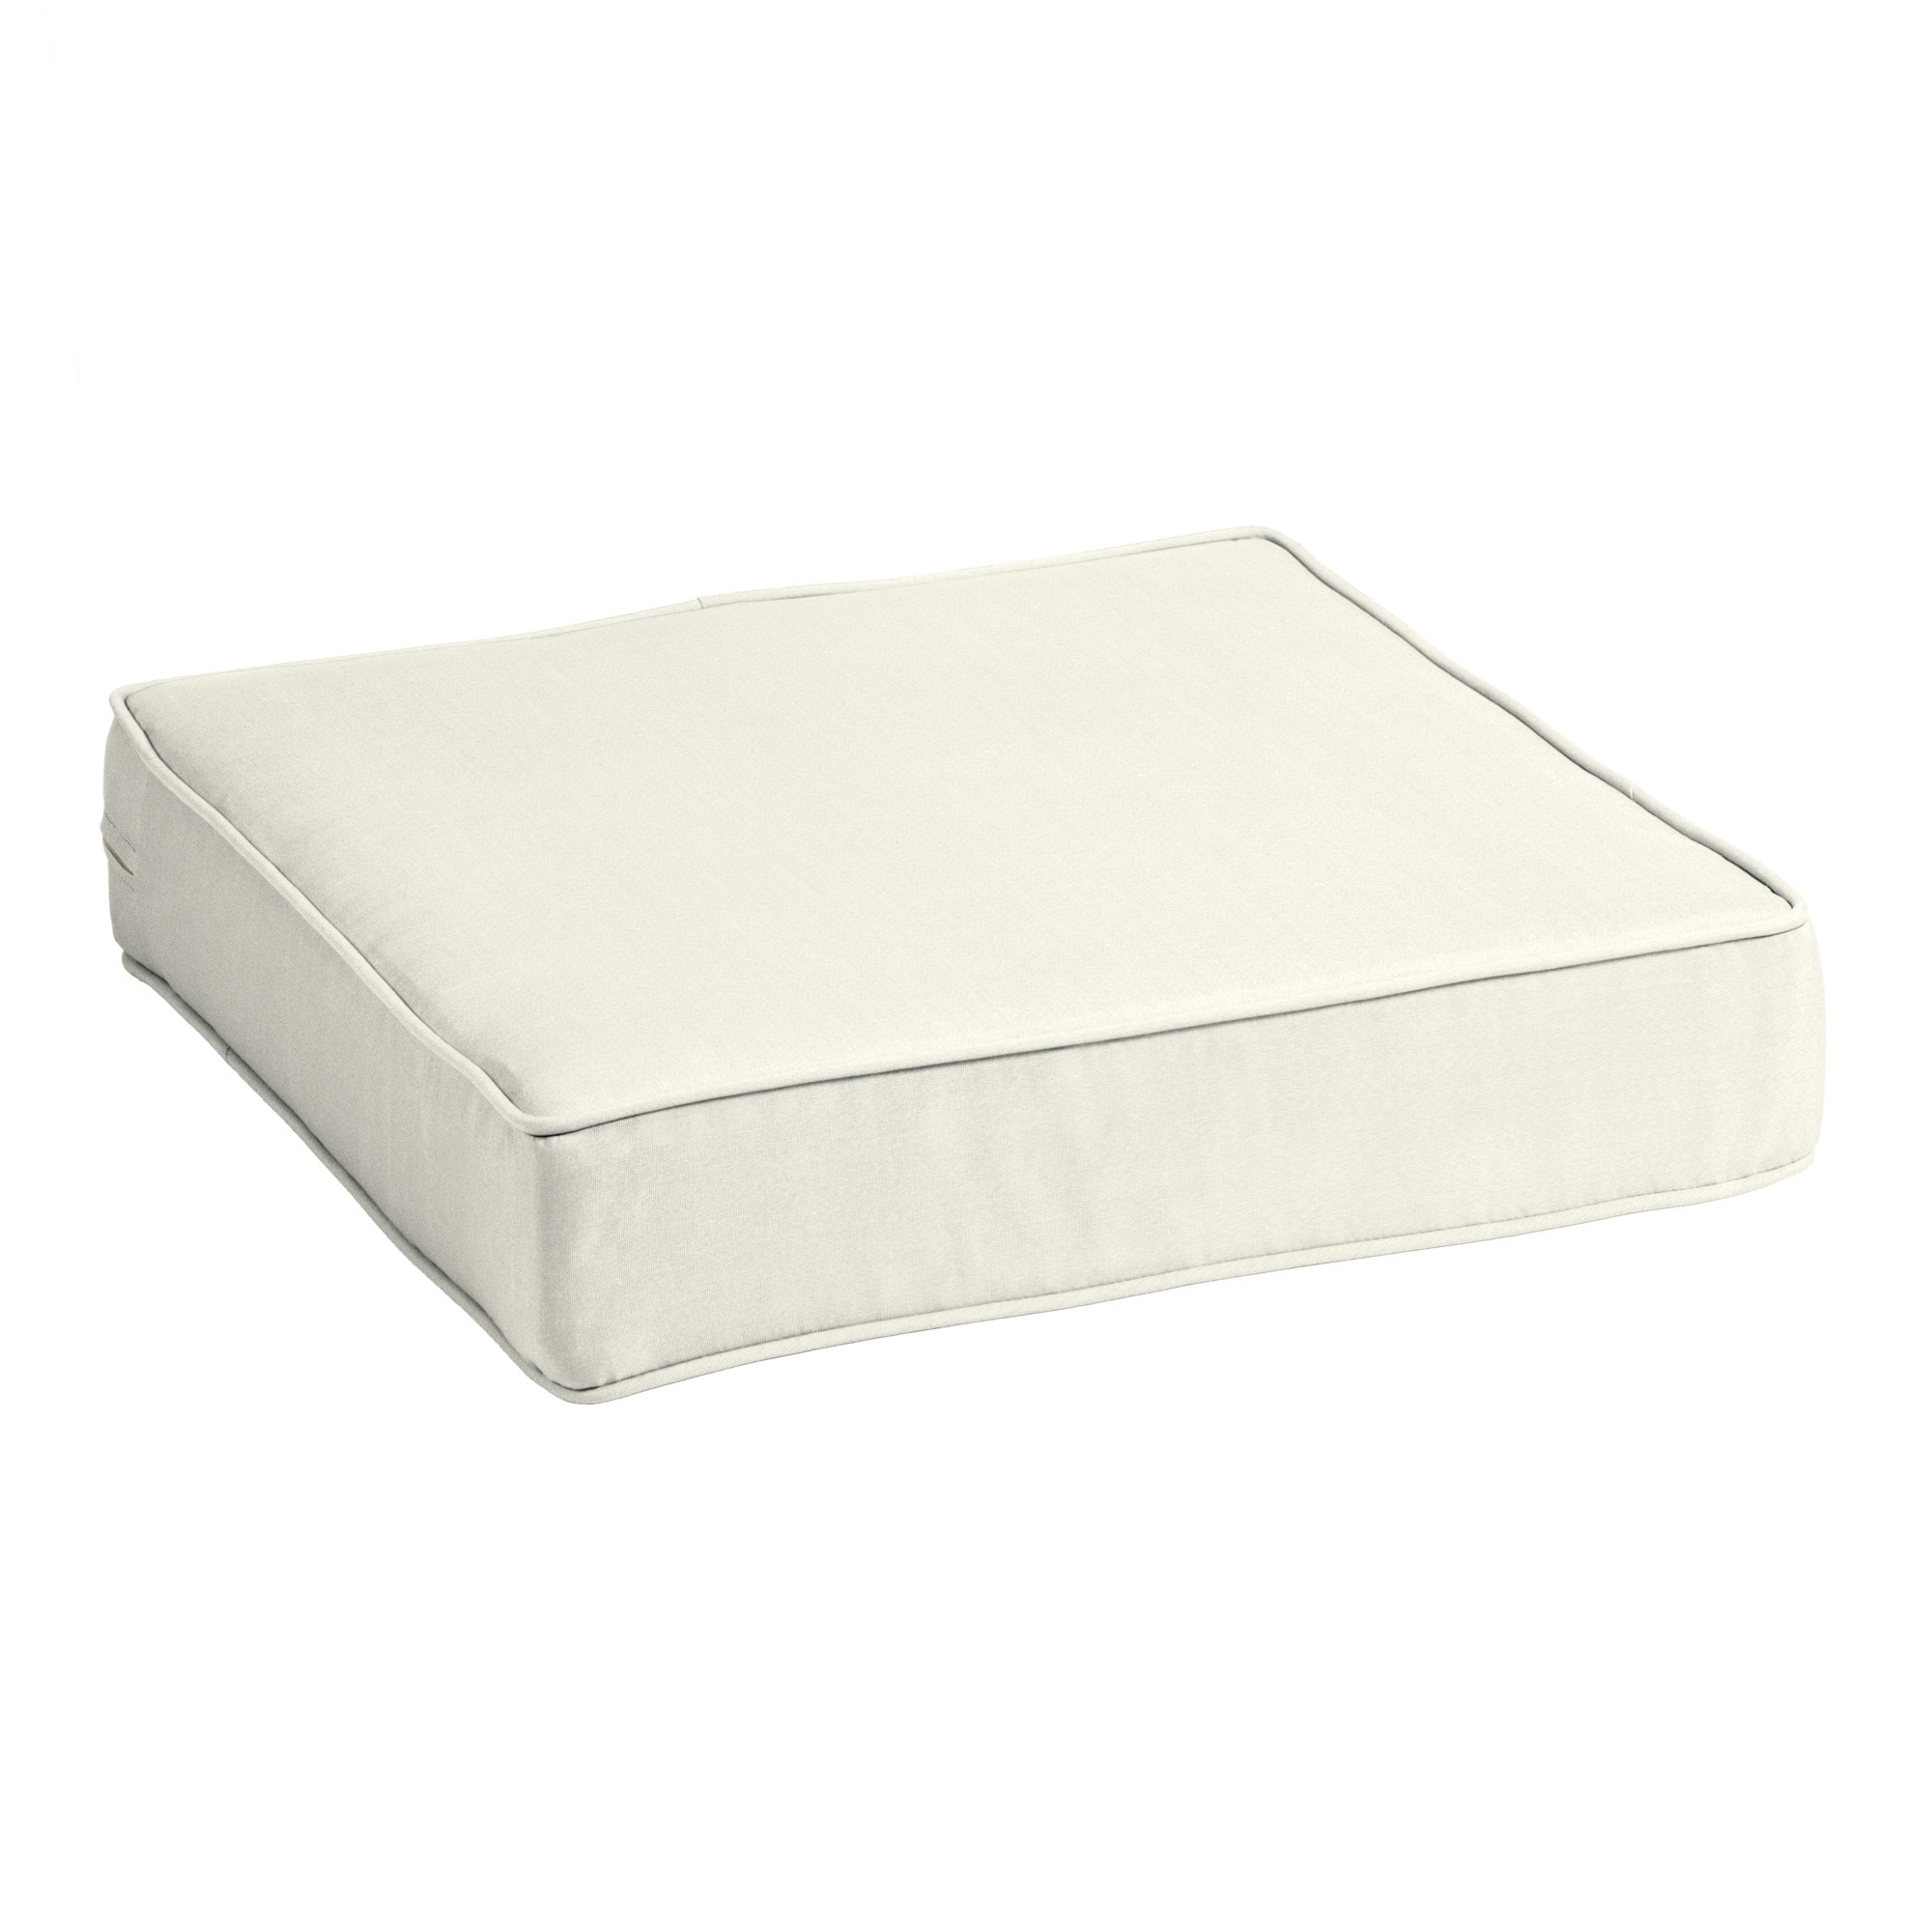 FRÖSÖN Cover For Seat Pad, Outdoor Beige, 243/8x243/8, 59% OFF